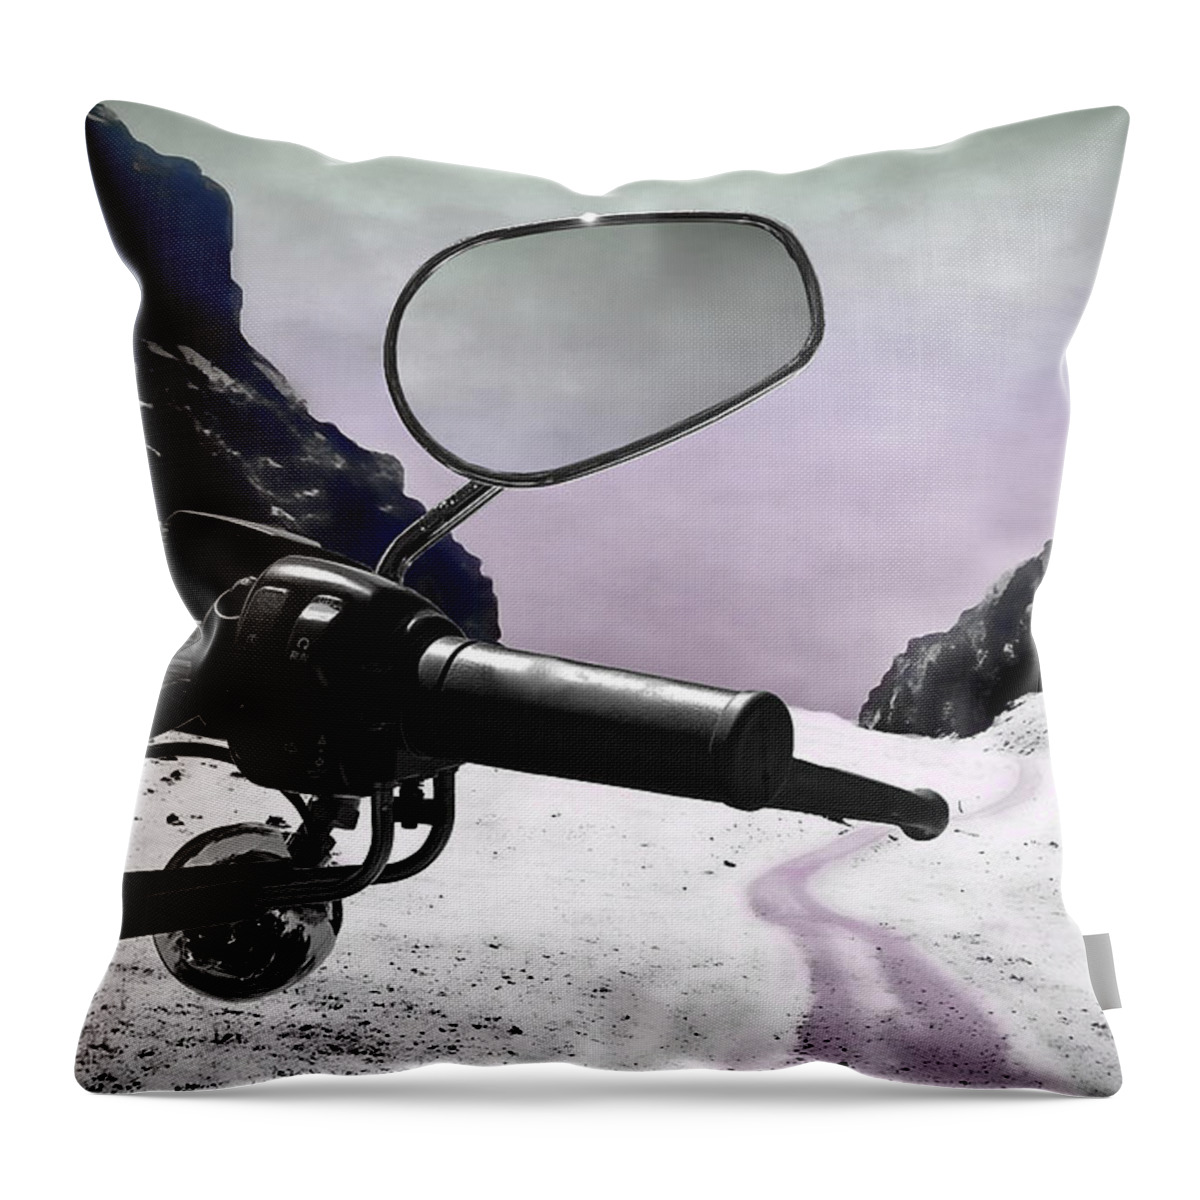 Handle Throw Pillow featuring the photograph Daredevil by Evelina Kremsdorf